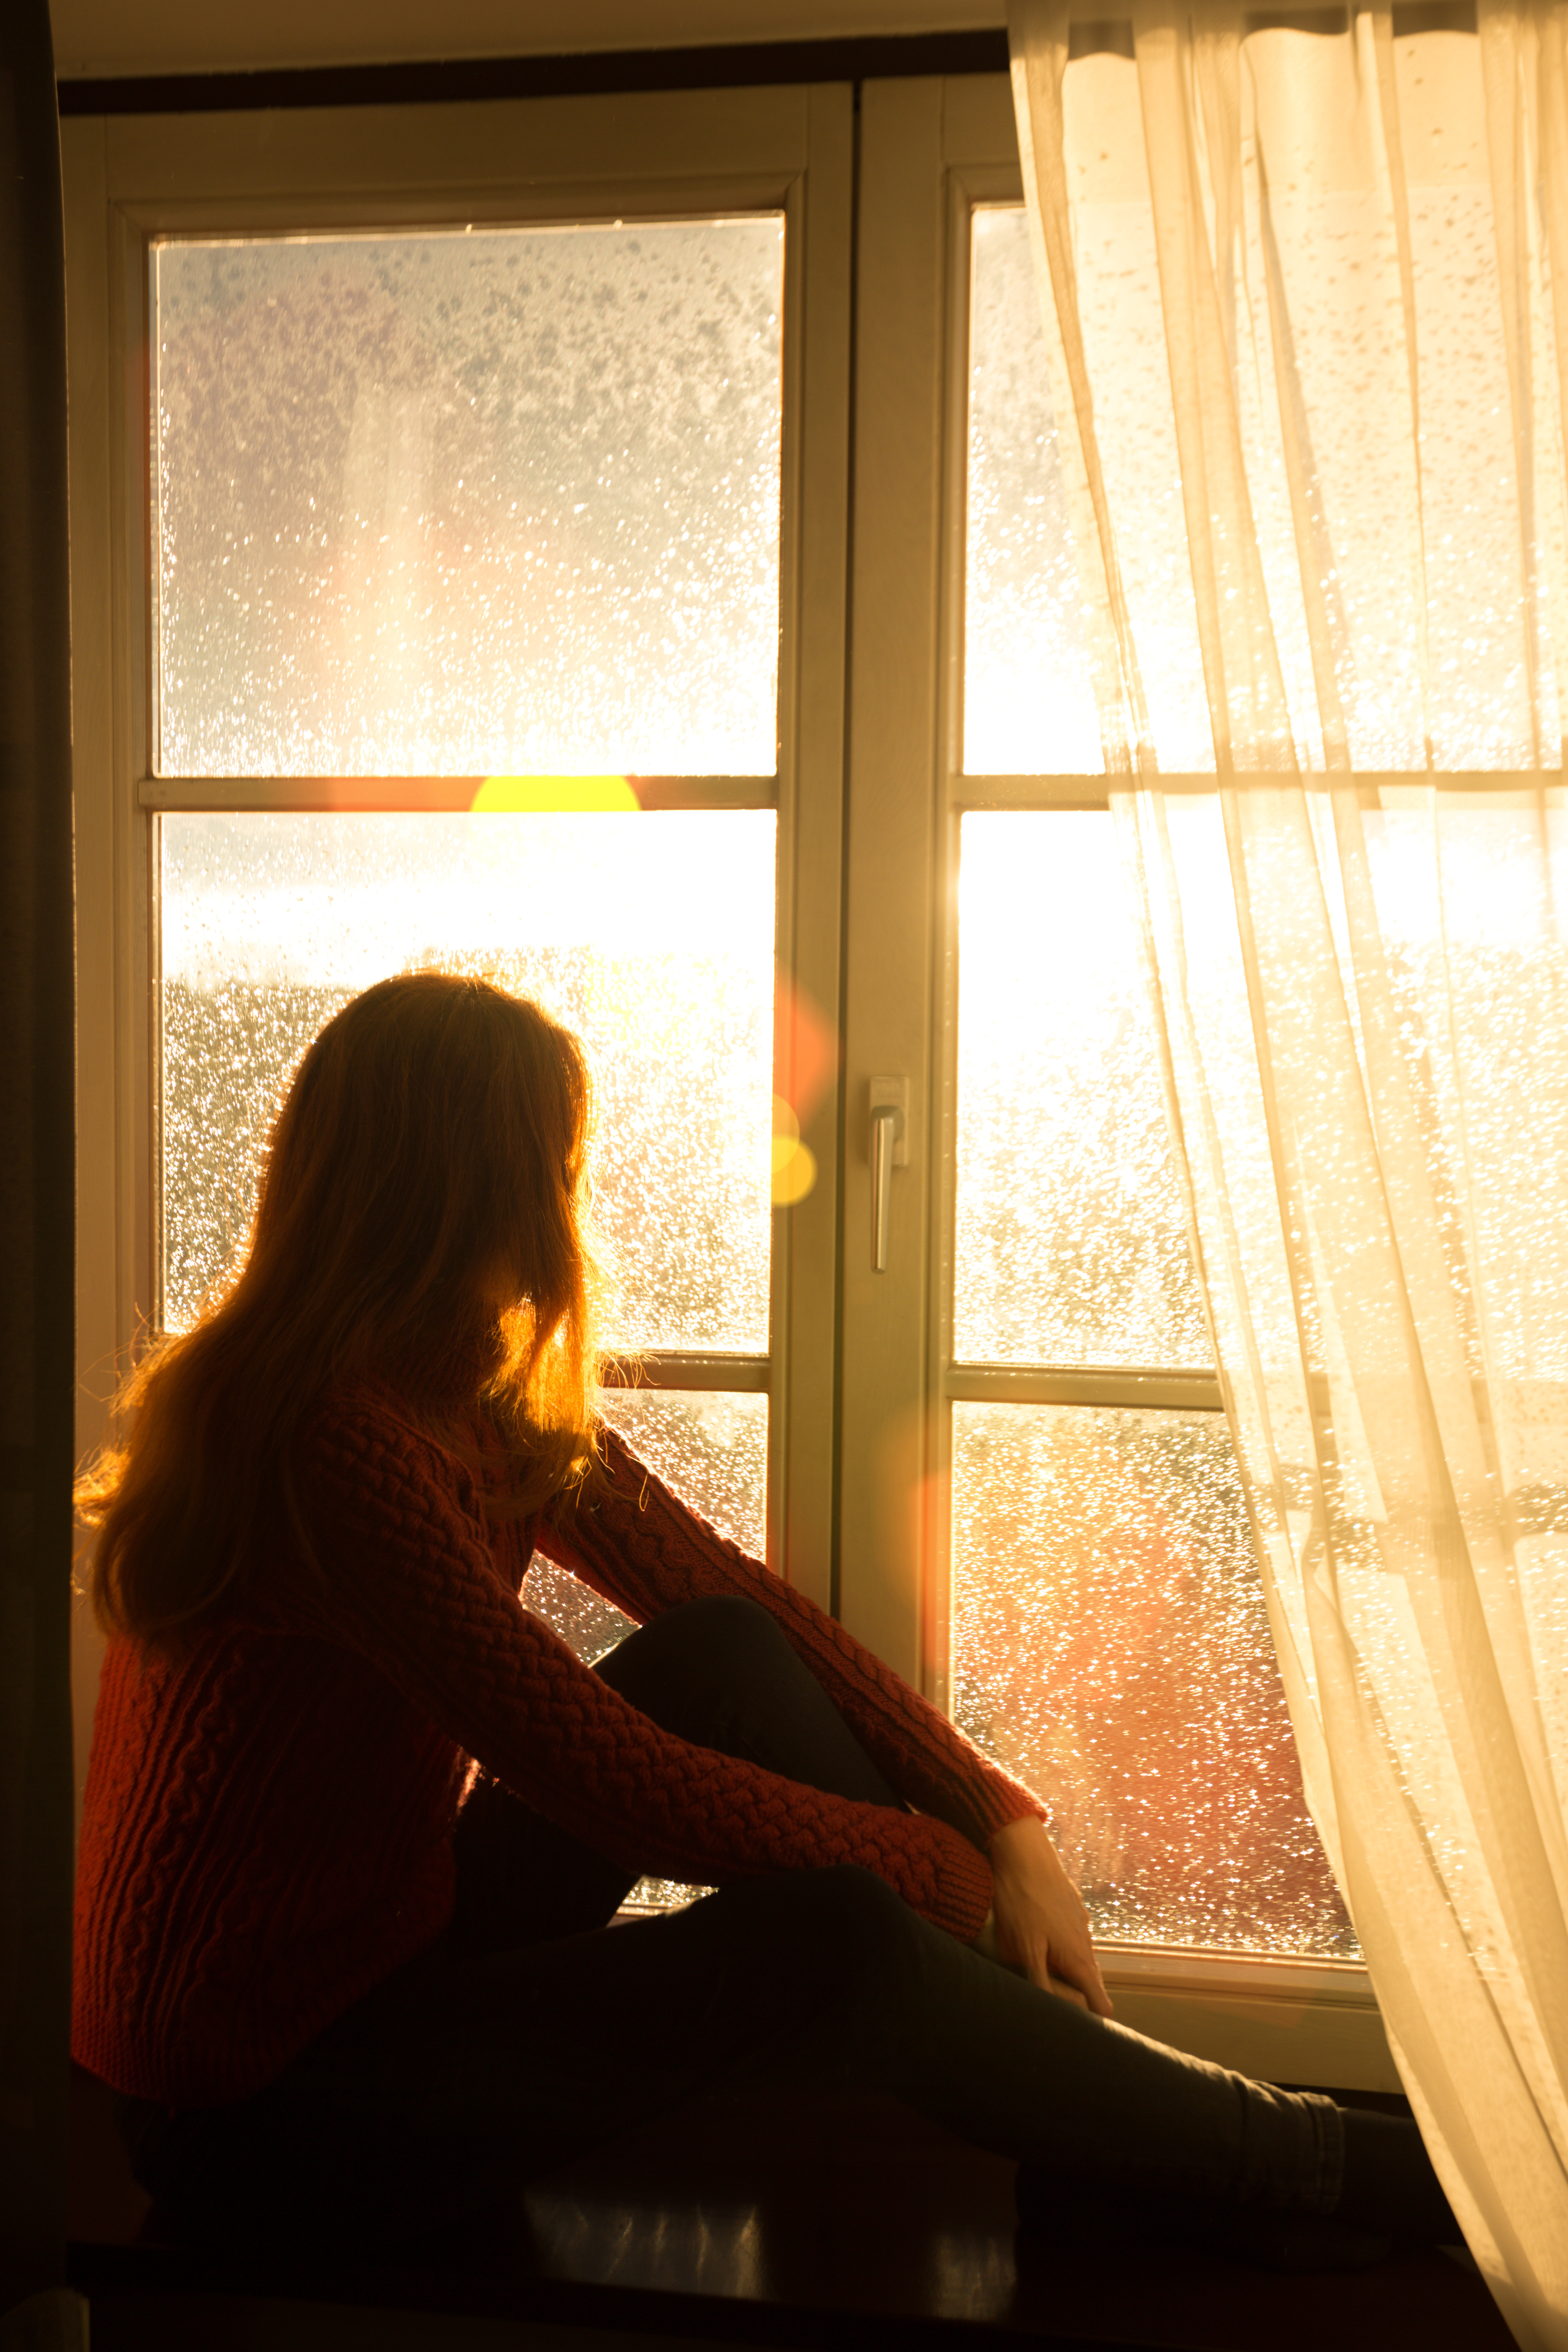 A woman sitting by her window - find Arvada multiple sclerosis treatment today with Light Lounge.